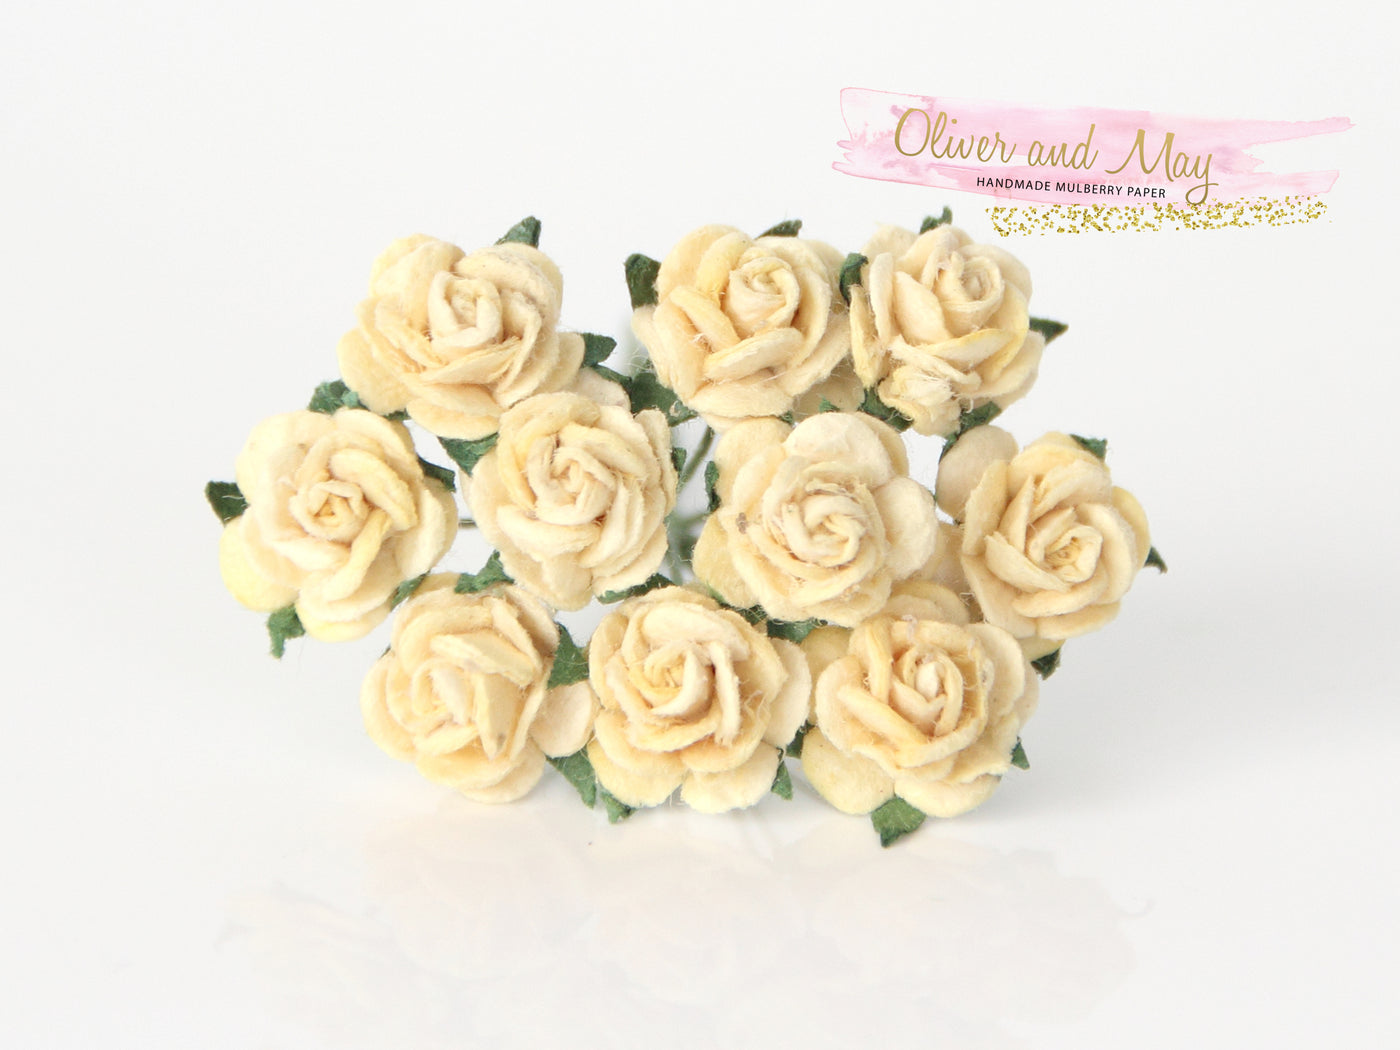 10 Pcs Mulberry Paper Flowers - 1cm Rounded Petal Roses - Soft Yellow